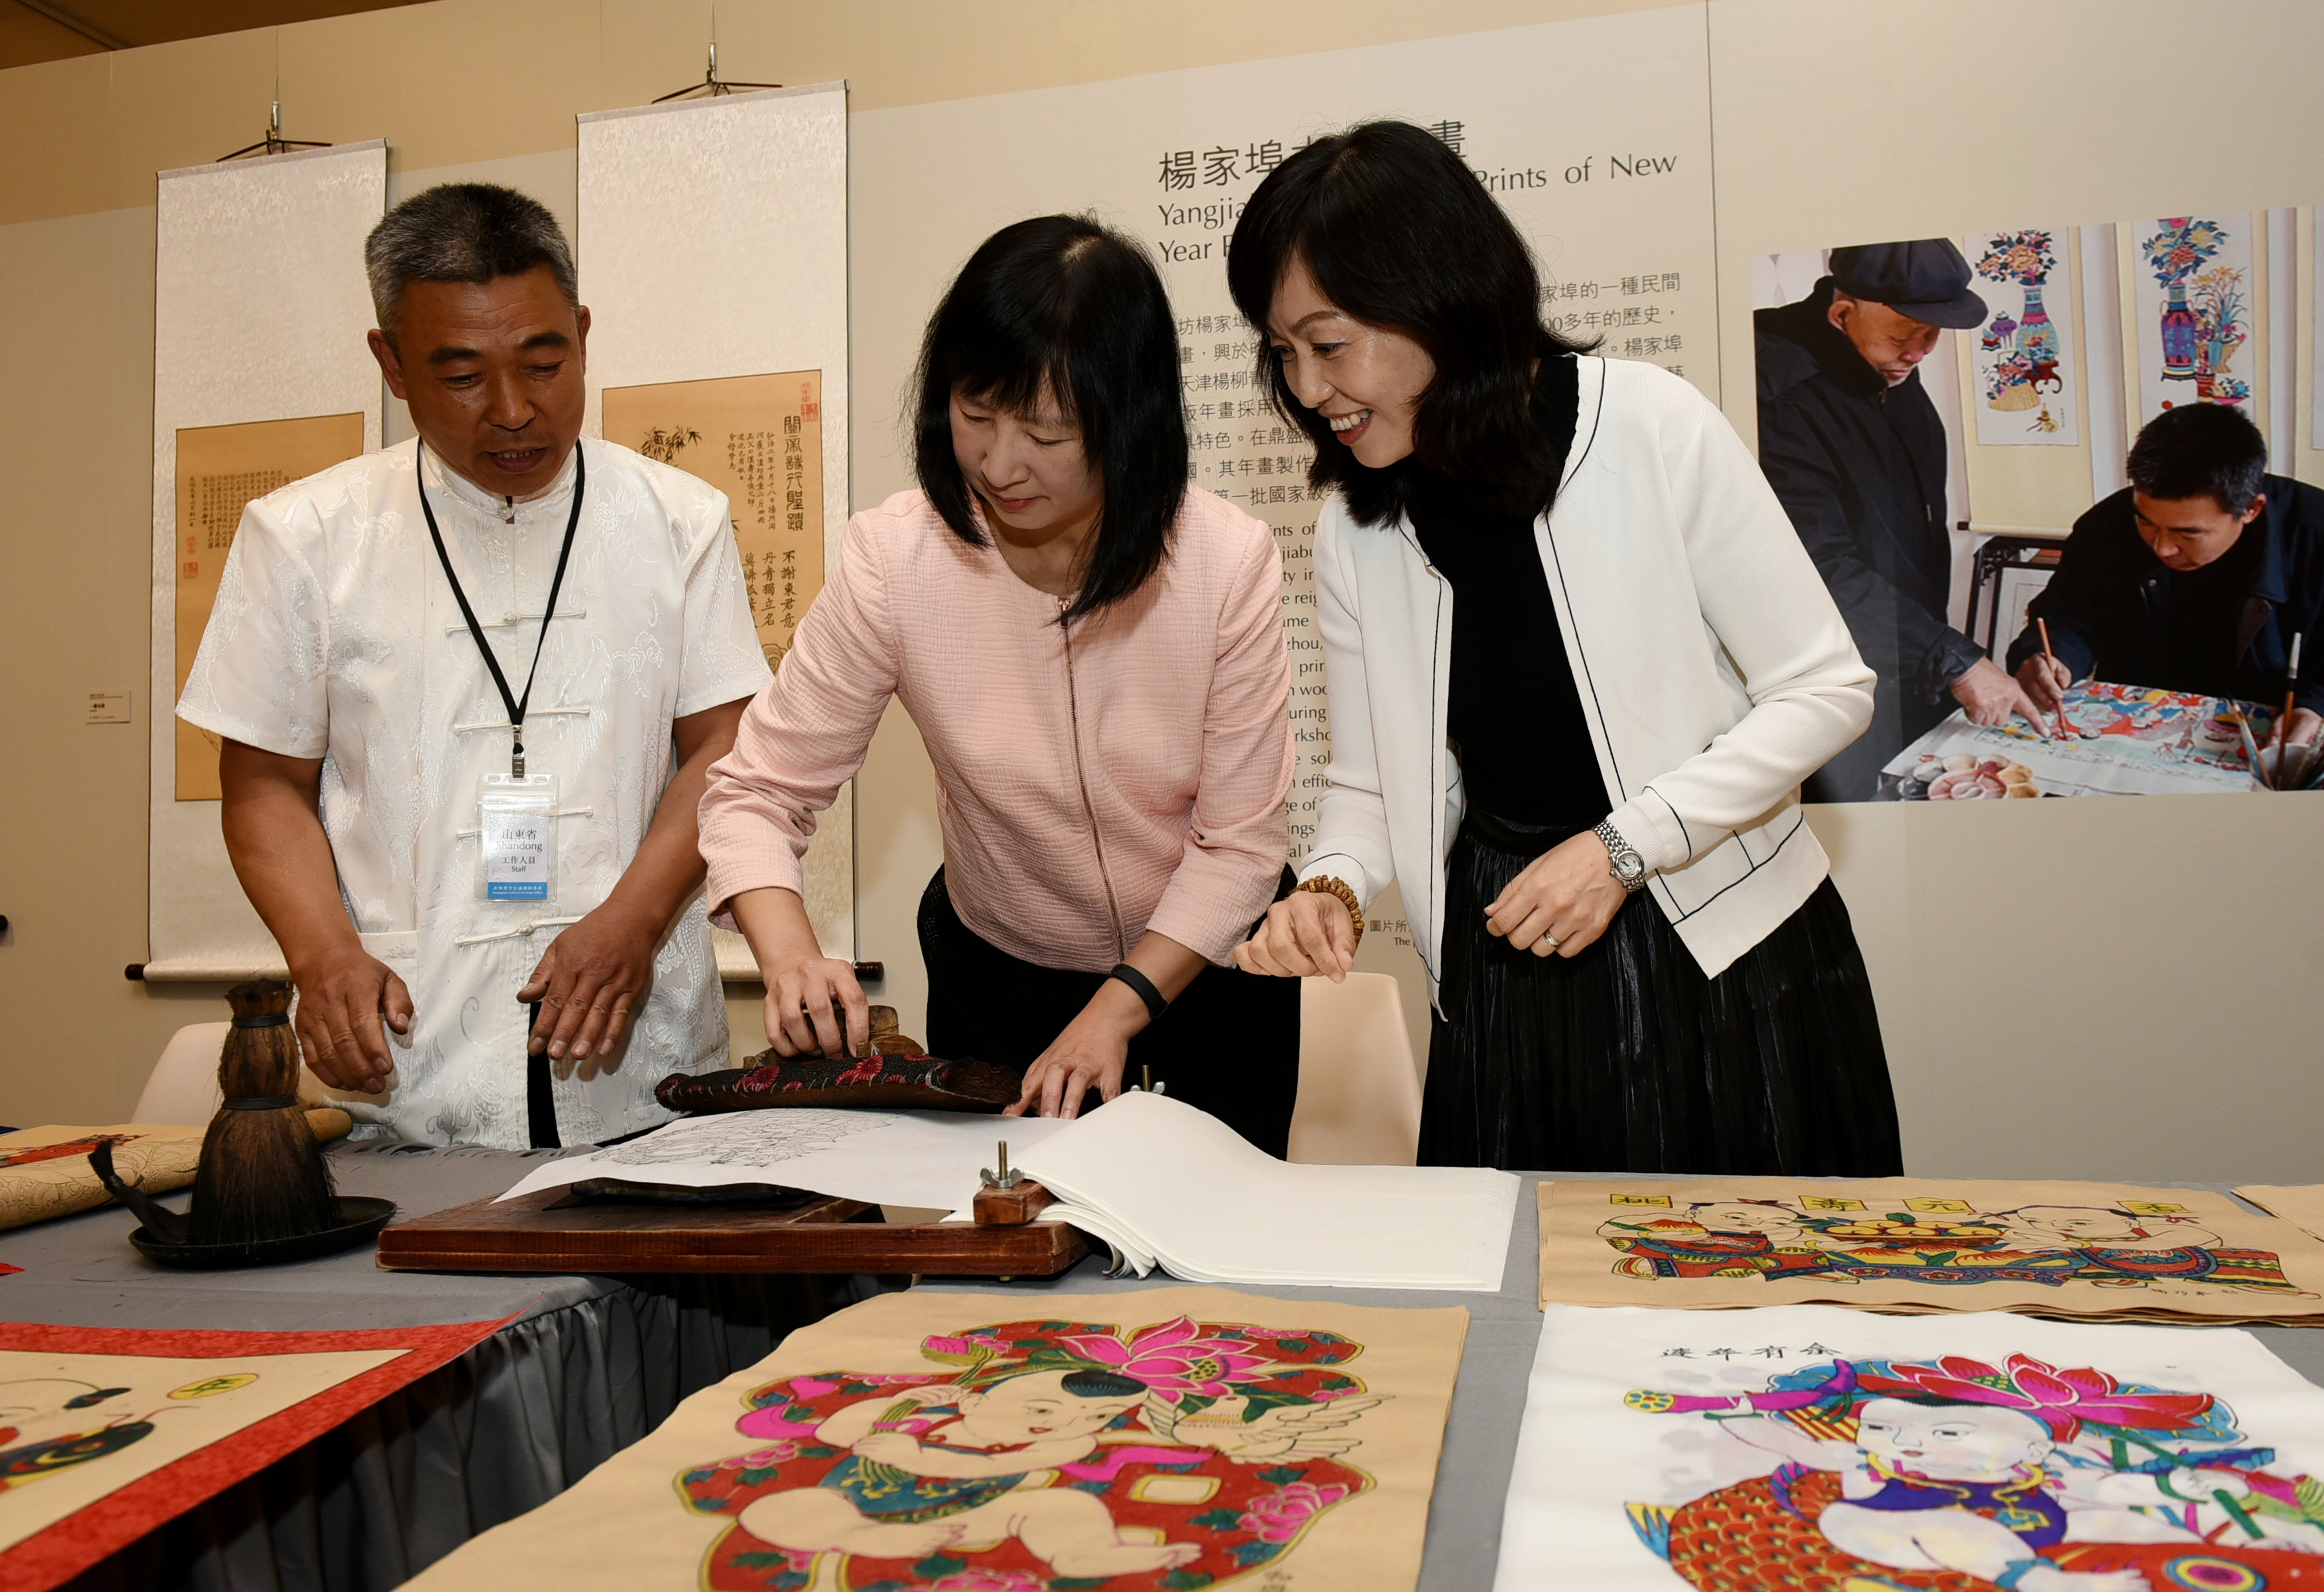 Demonstration of Yangjiabu Woodblock Prints of New Year Paintings: Zhao Xintian (right), deputy curator of the Shandong Provincial Cultural Center, and Yang Naidong (left), an intangible cultural heritage bearer of Yangjiabu woodblock prints of New Year Paintings, introducing the art to Michelle Li (centre), Director of Leisure and Cultural Services.